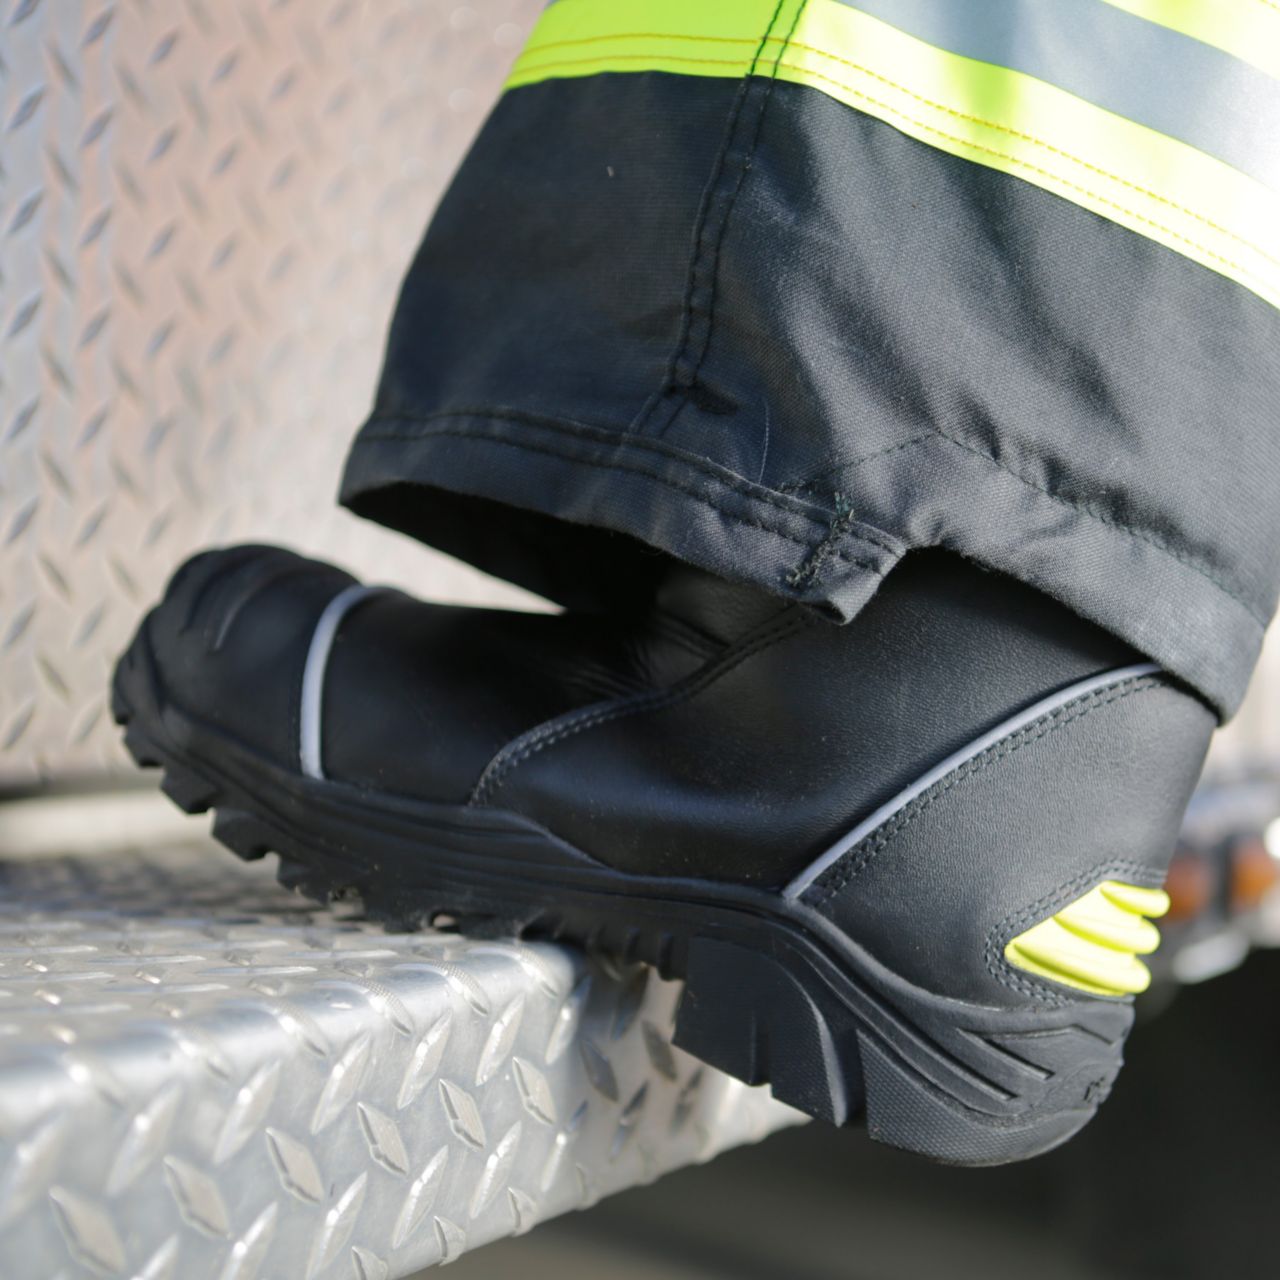 Pro Warrington 5555 NightHawk 14” Structural Boots (BT5555) | Fire Store | Fuego Fire Center | Firefighter Gear | The NightHawk Boots feature breathable, waterproof, and blood borne pathogen resistant CROSSTECH® membranes with Cambrelle® liners for outstanding moisture management and wear resistance. 